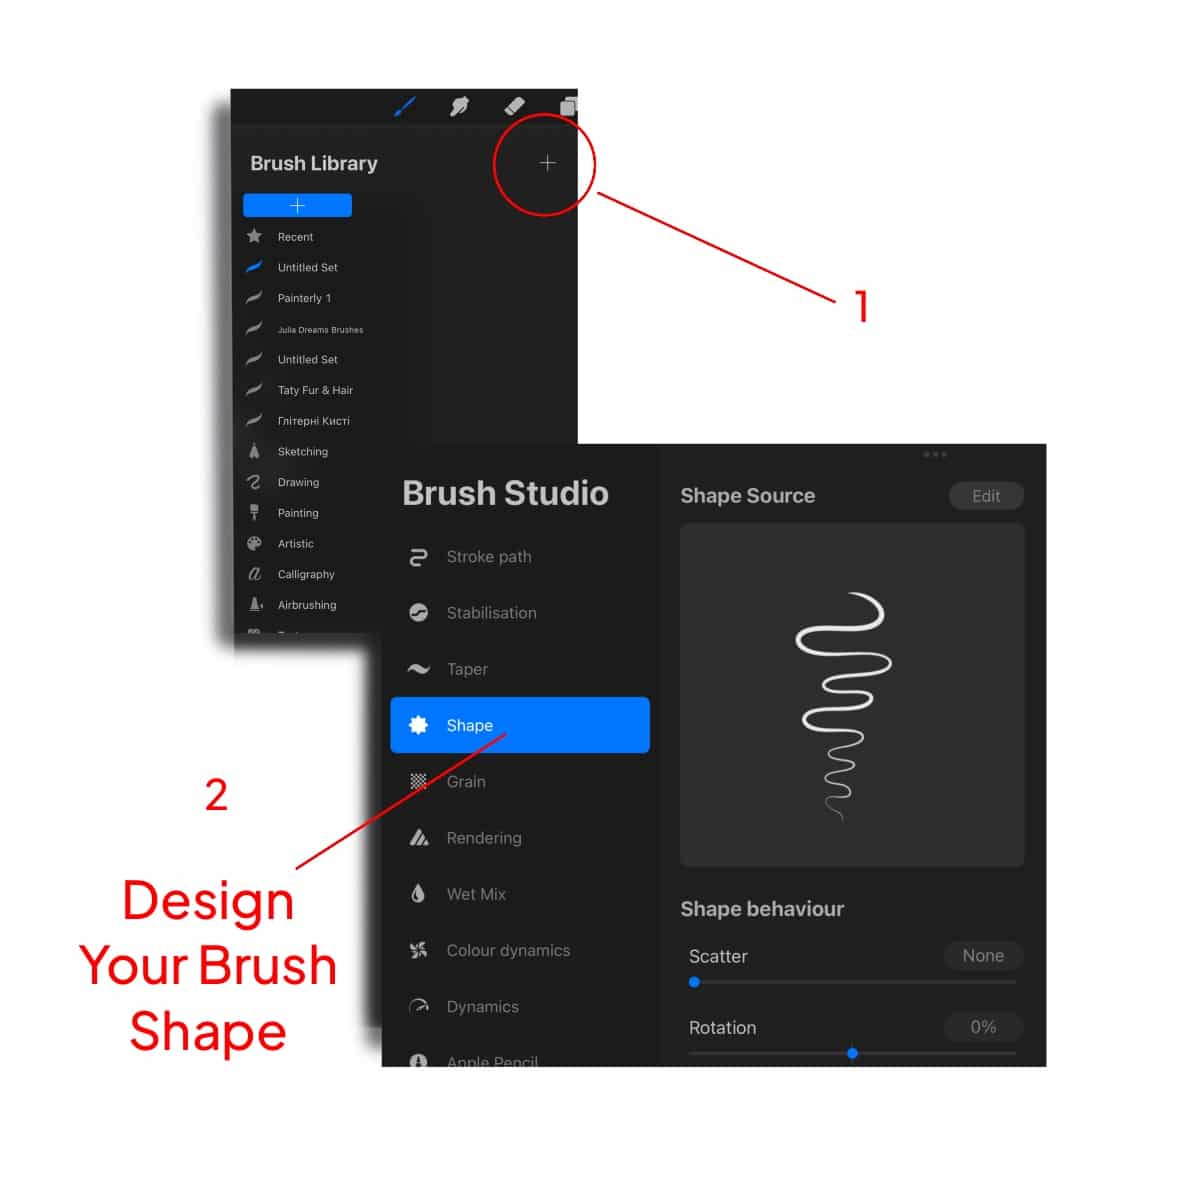 The "Brush Studio" Screen in Procreate, with the selected "Shape" option.